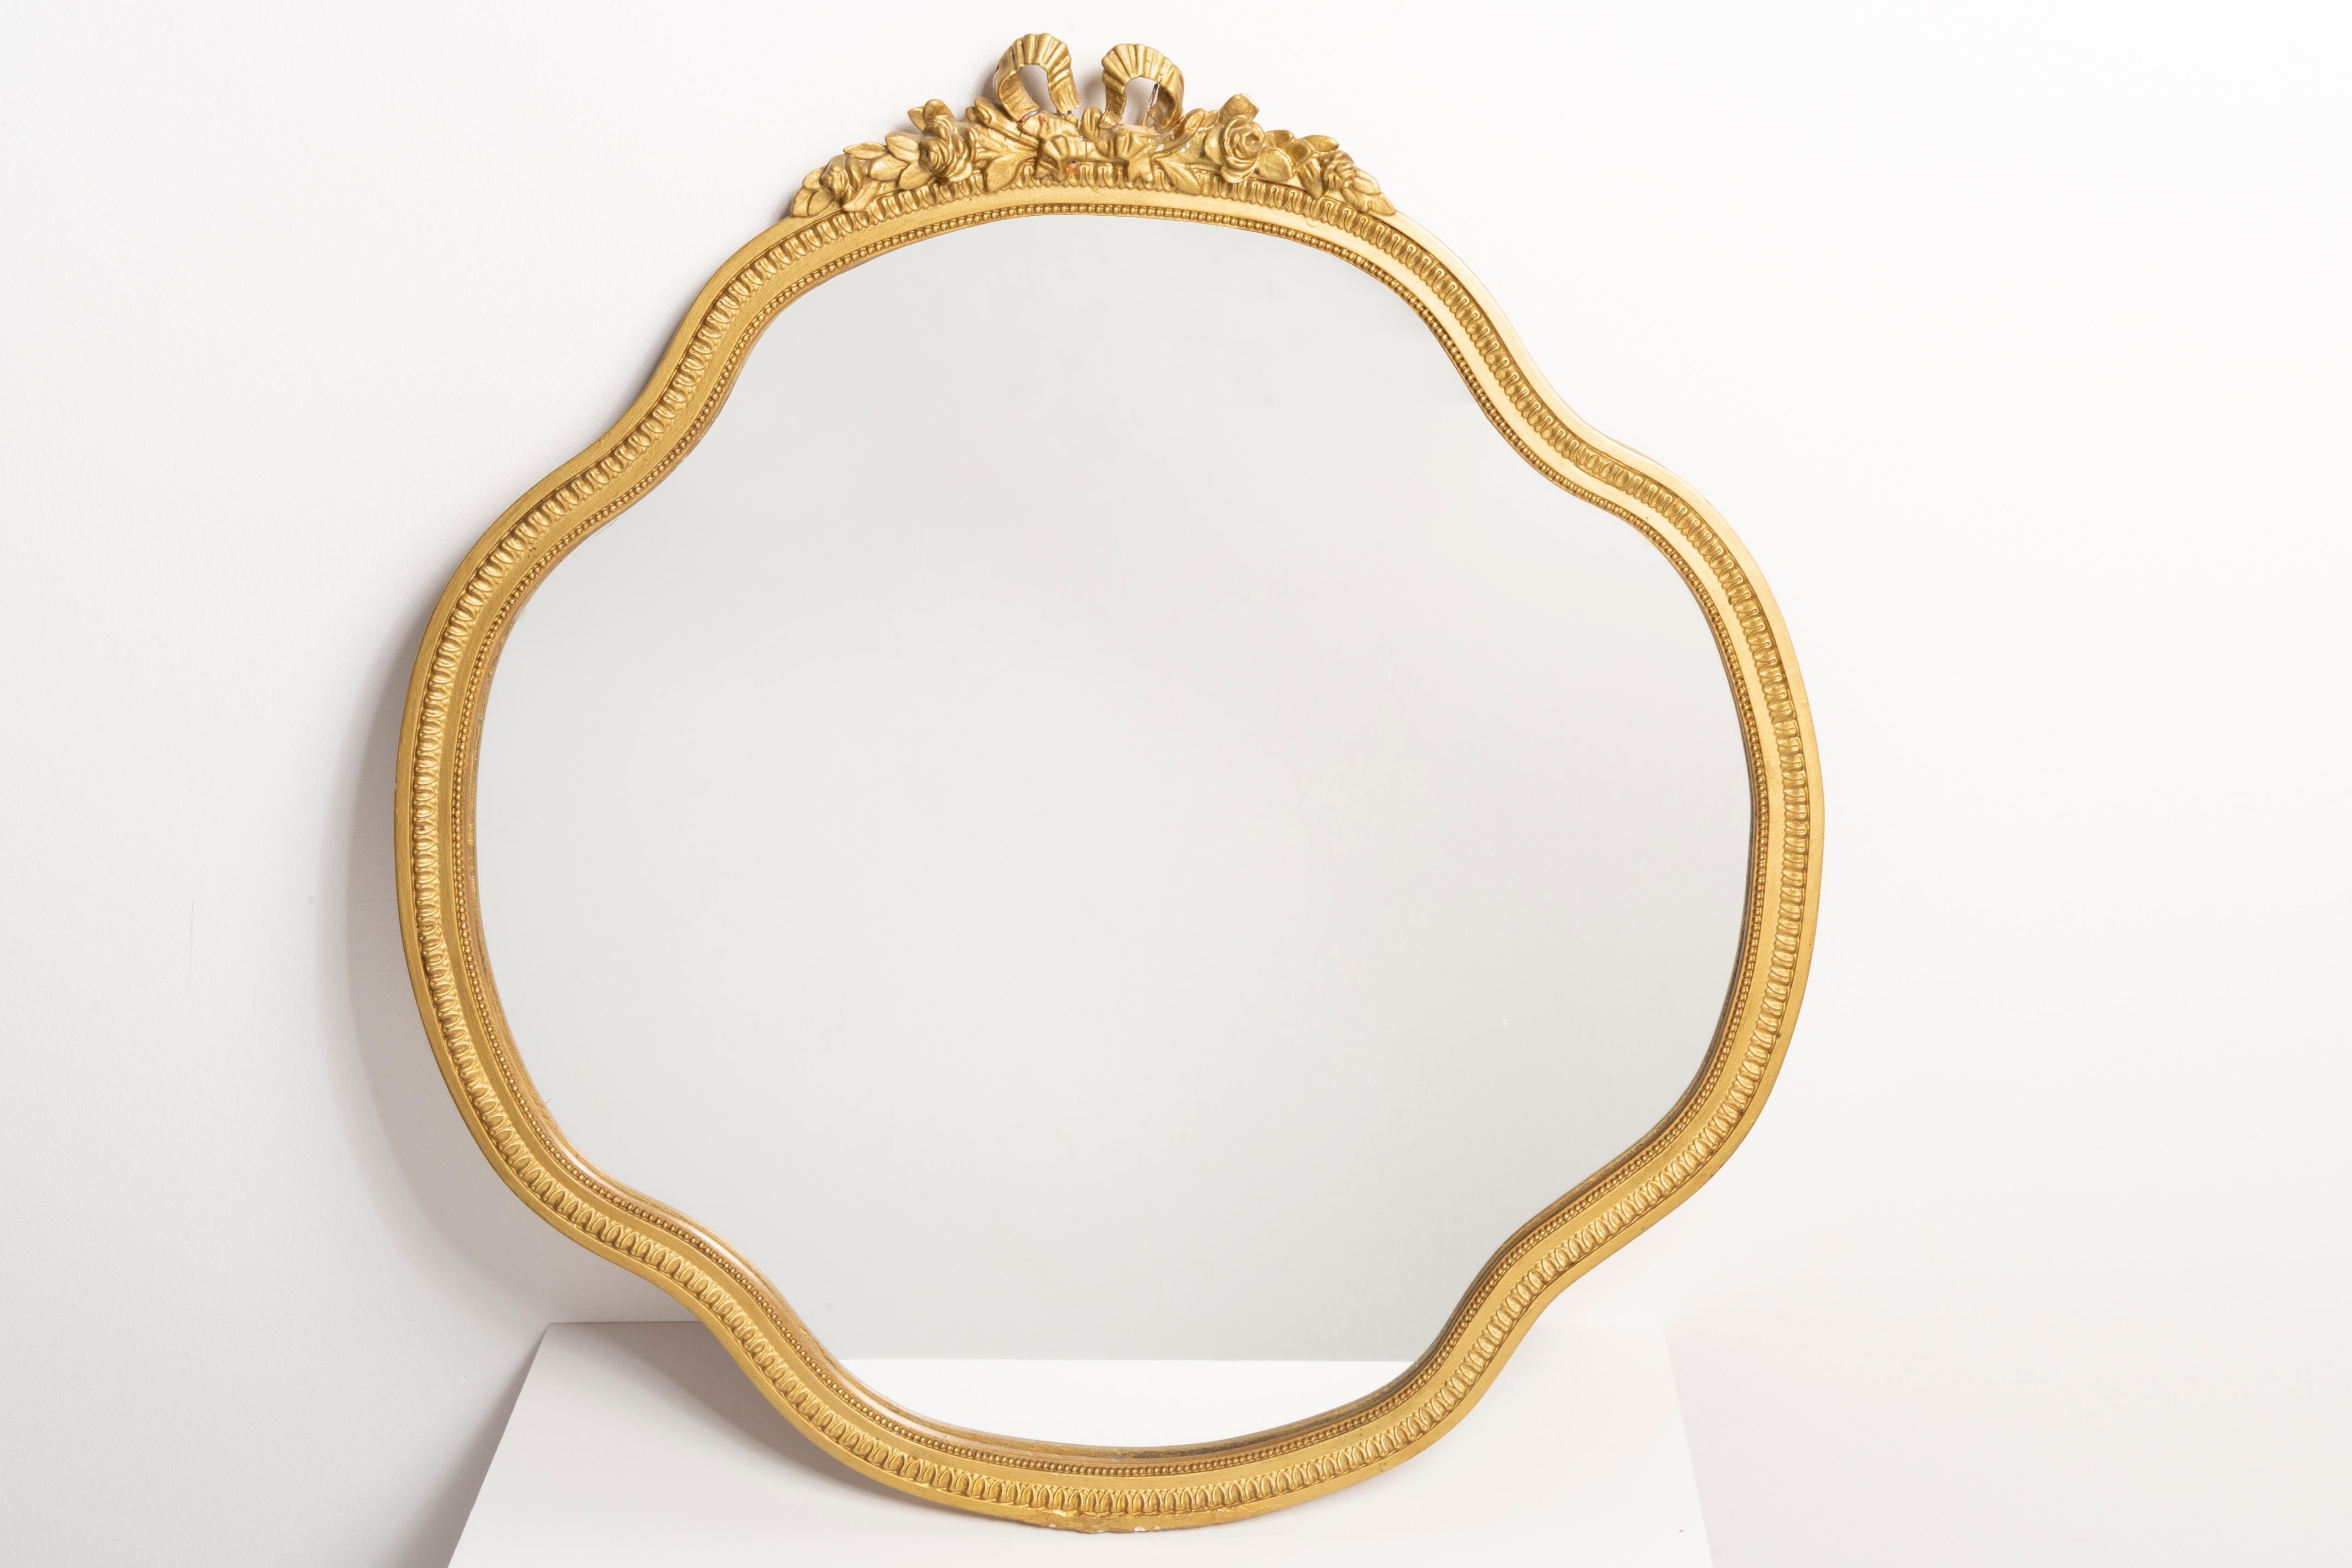 A beautiful romb mirror in a golden decorative frame with flowers from Italy. The frame is made of wood. Mirror is in very good vintage condition. Original glass. Beautiful piece for every interior! Only one unique piece.